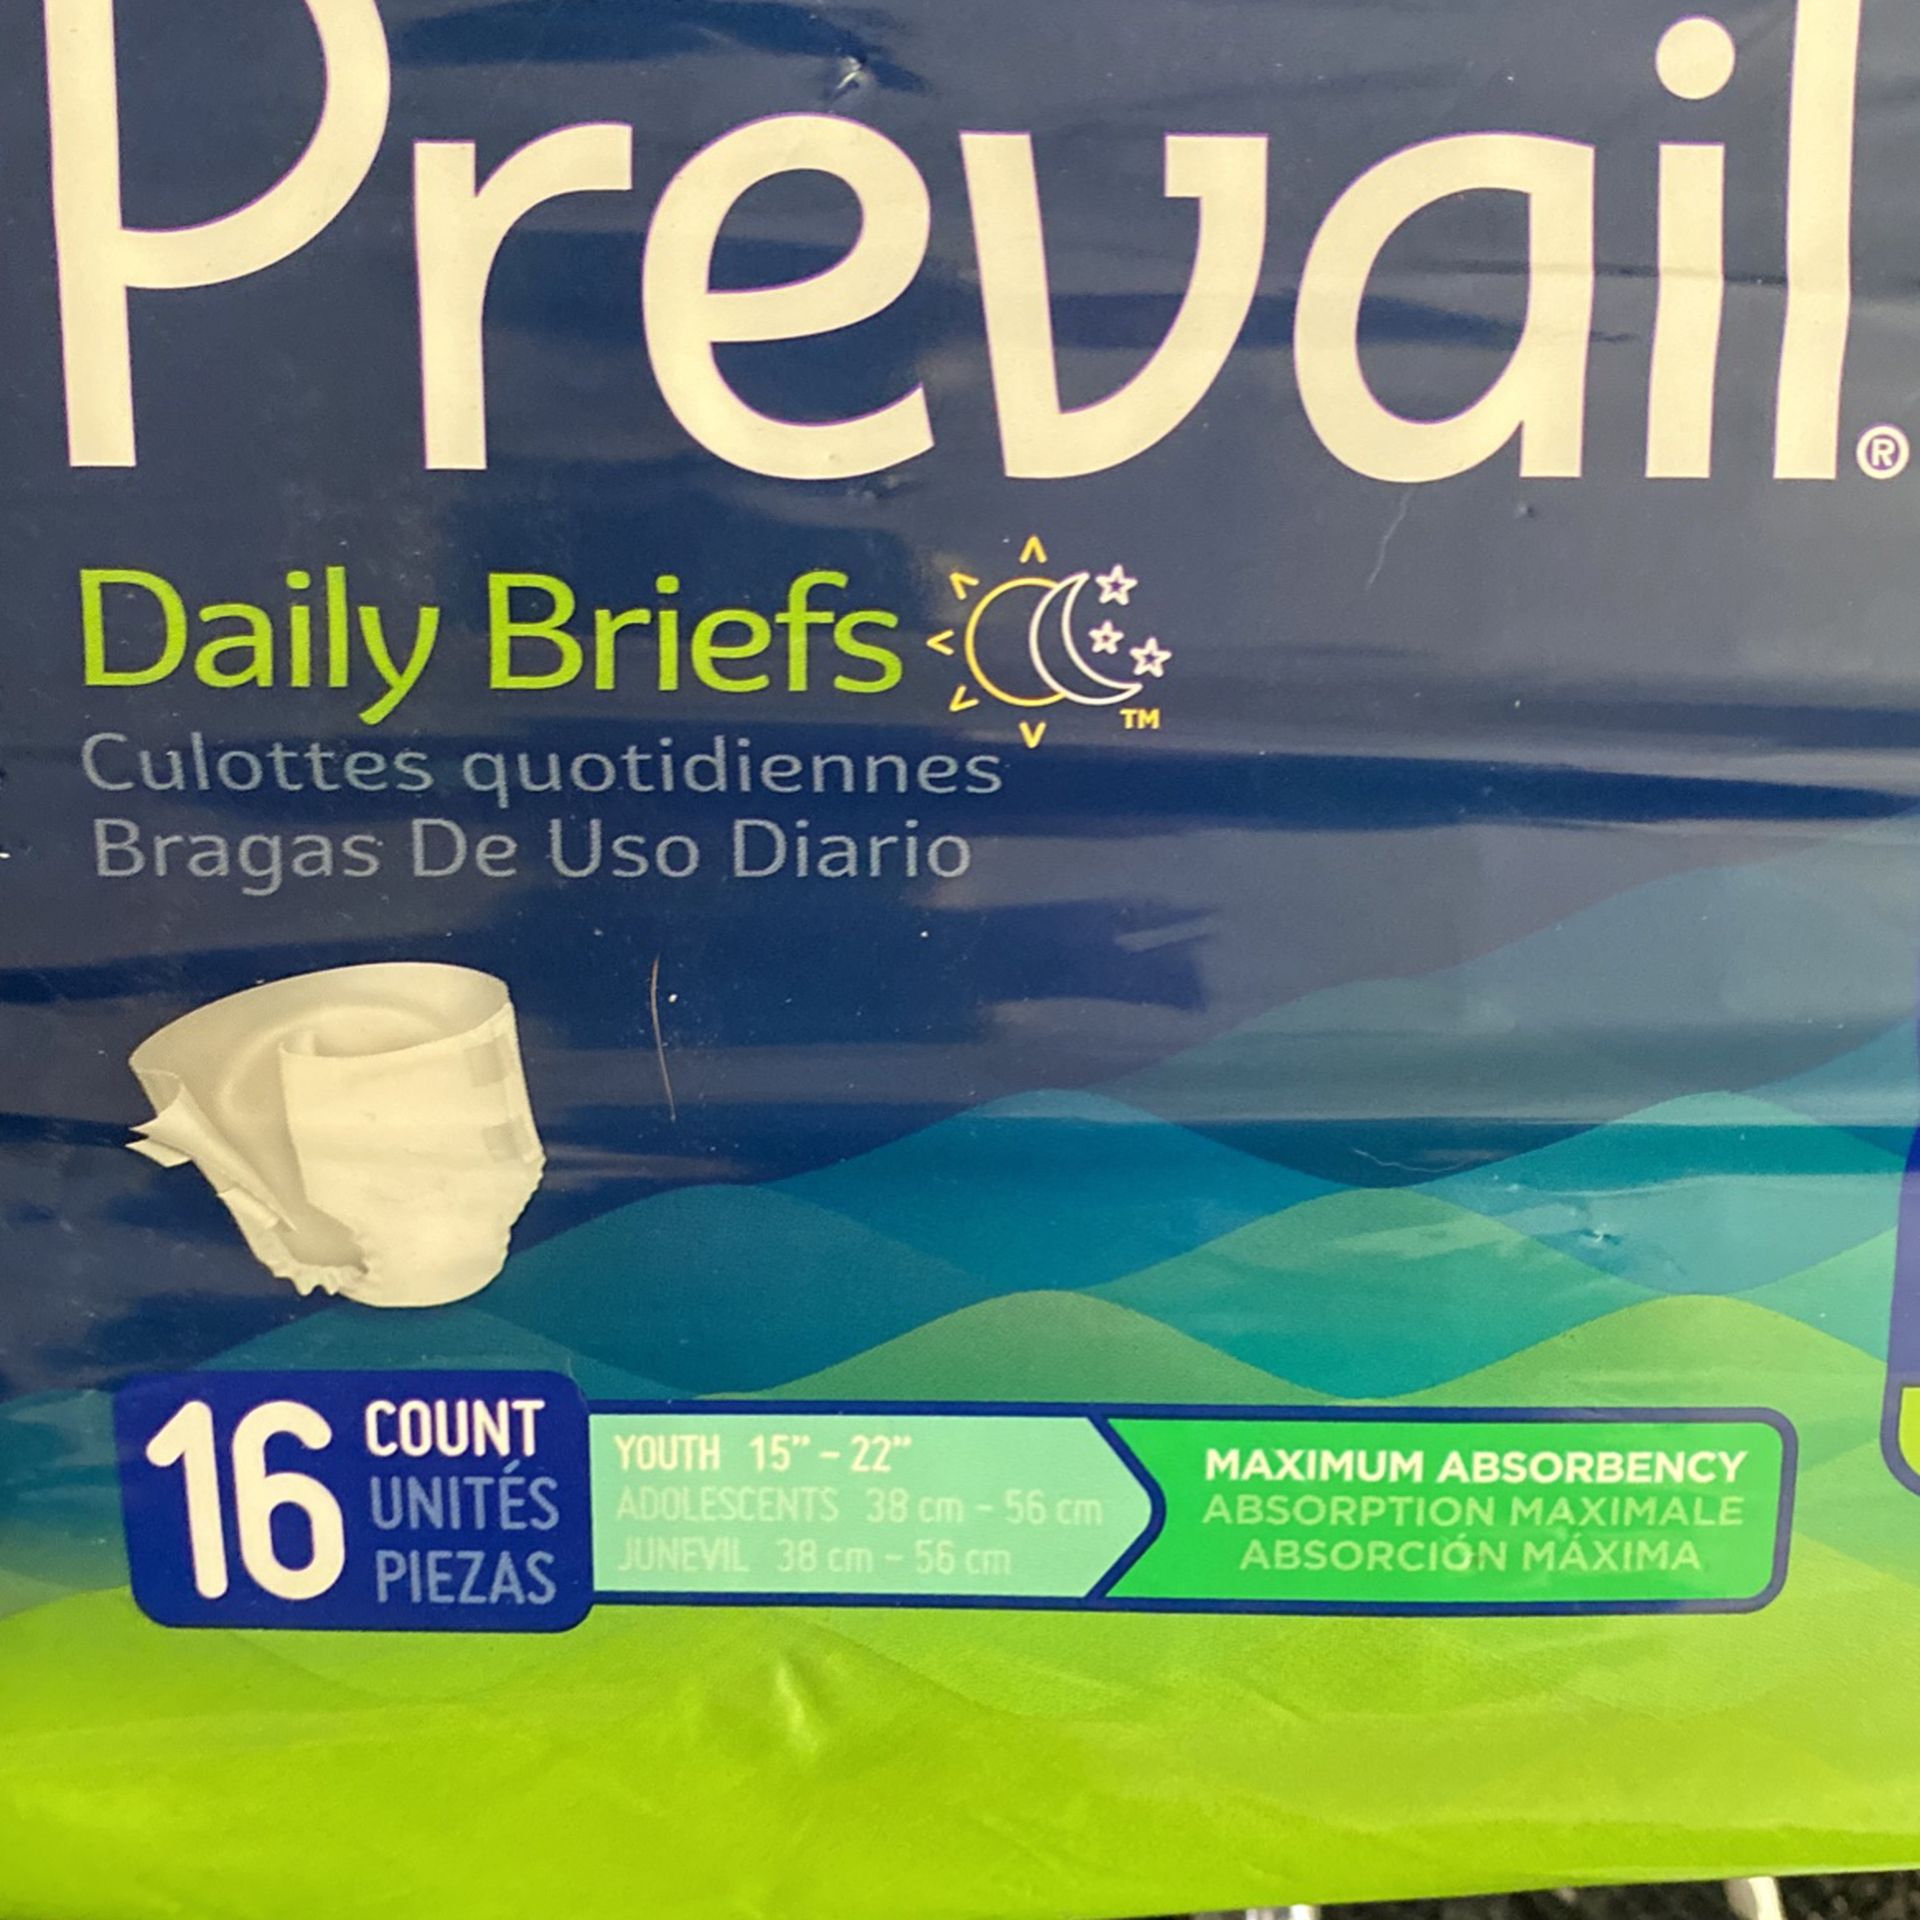 Youth Size Prevail Daily Briefs